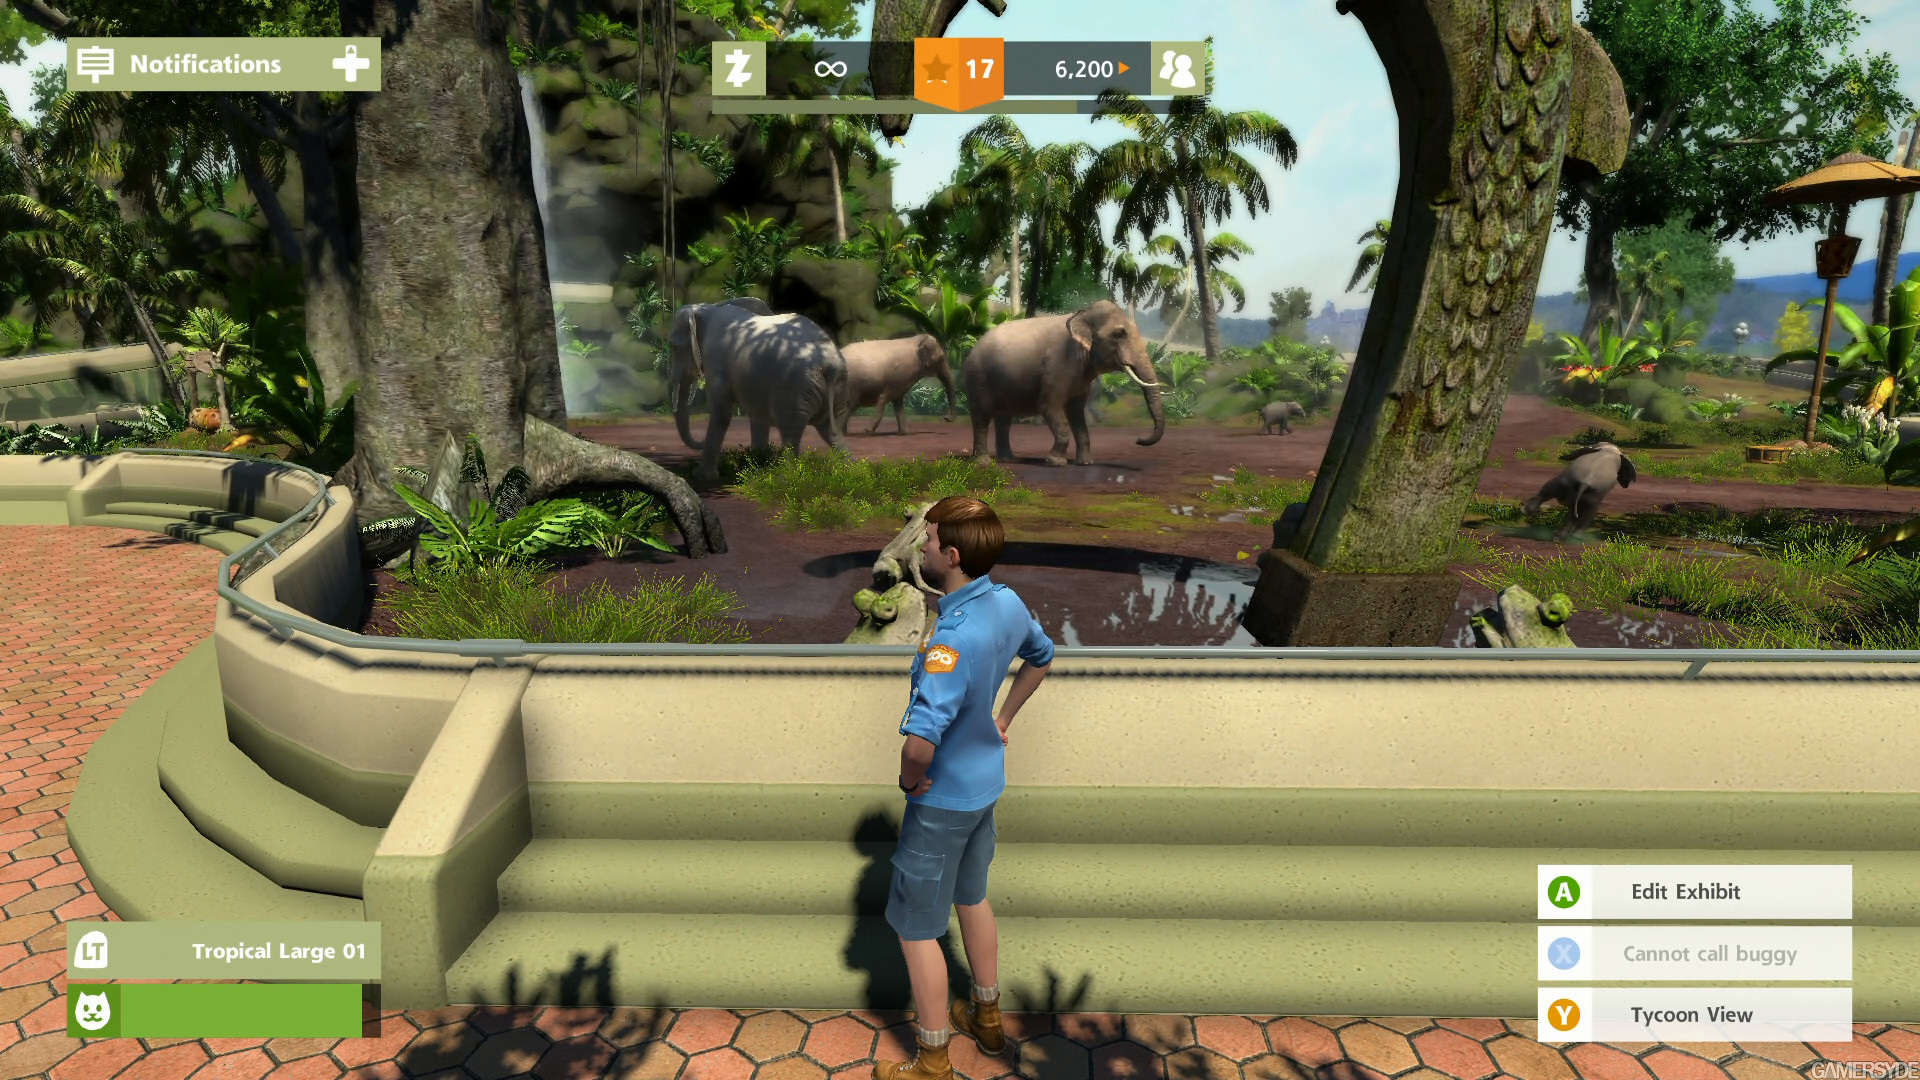 zoo tycoon 3 pc release date